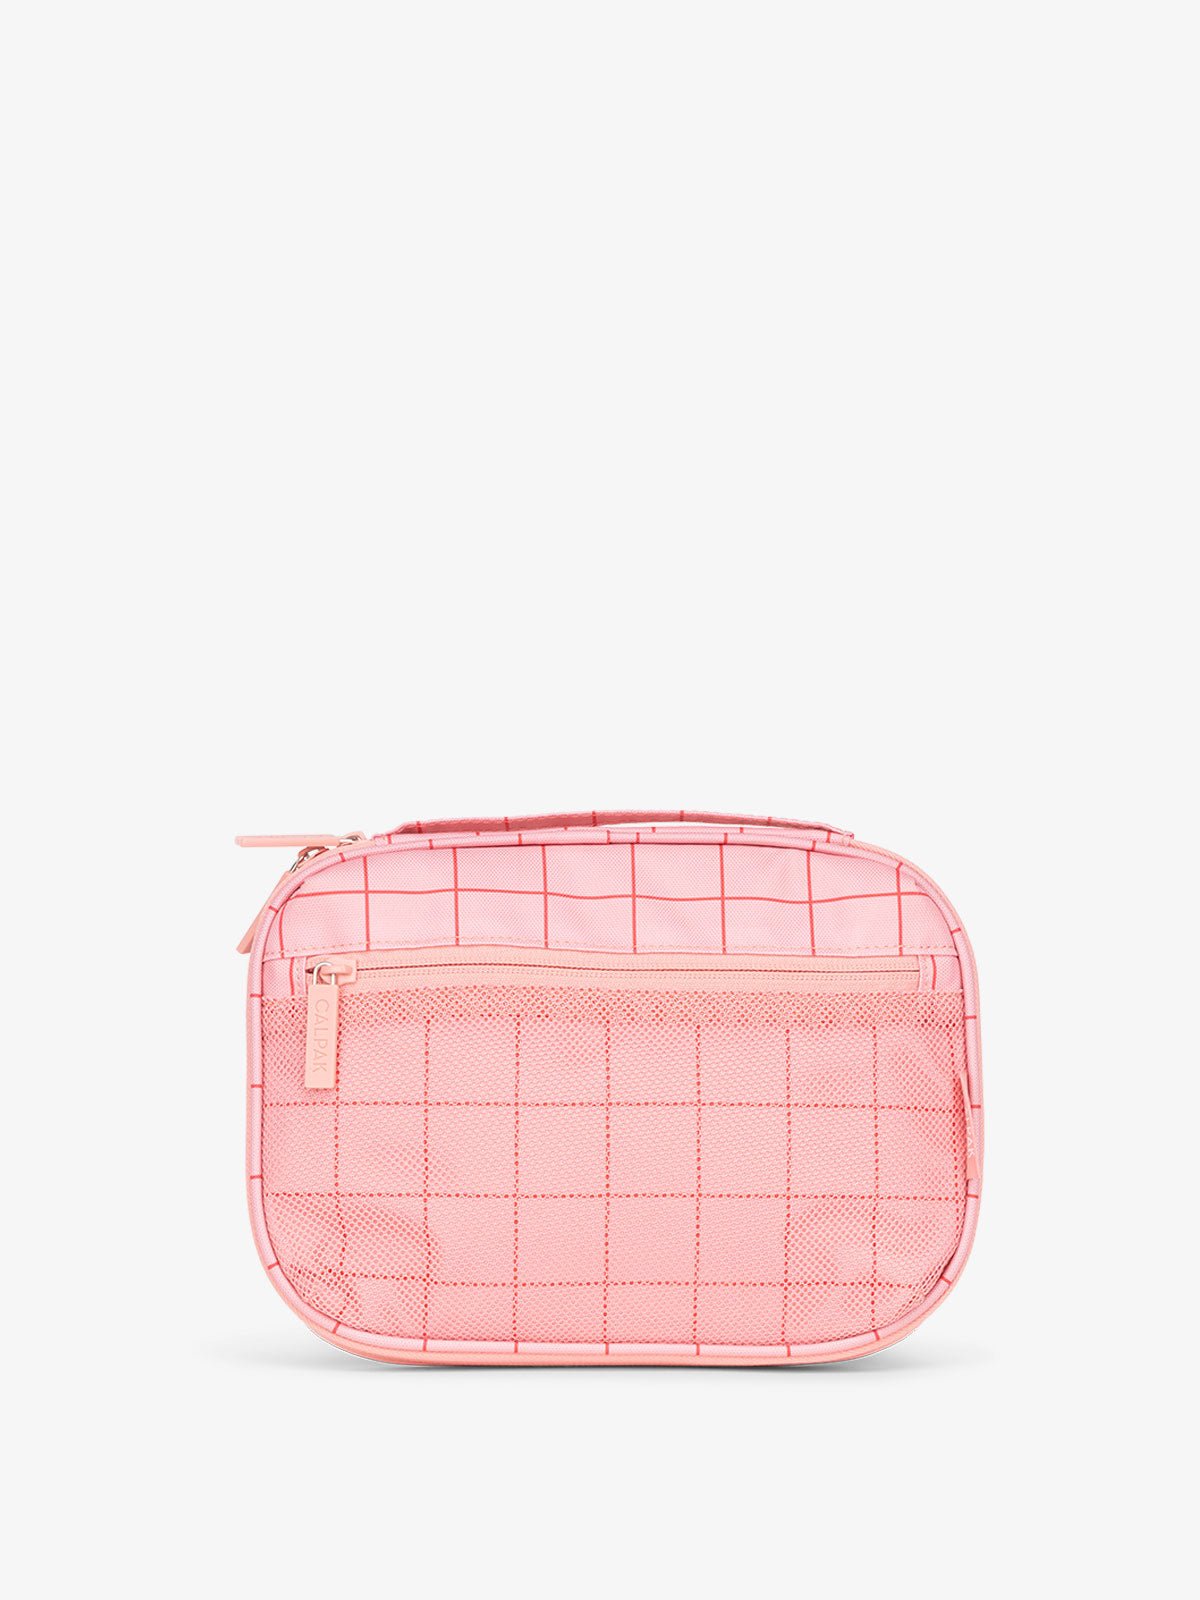 CALPAK Tech organizer with mesh front pocket in pink grid